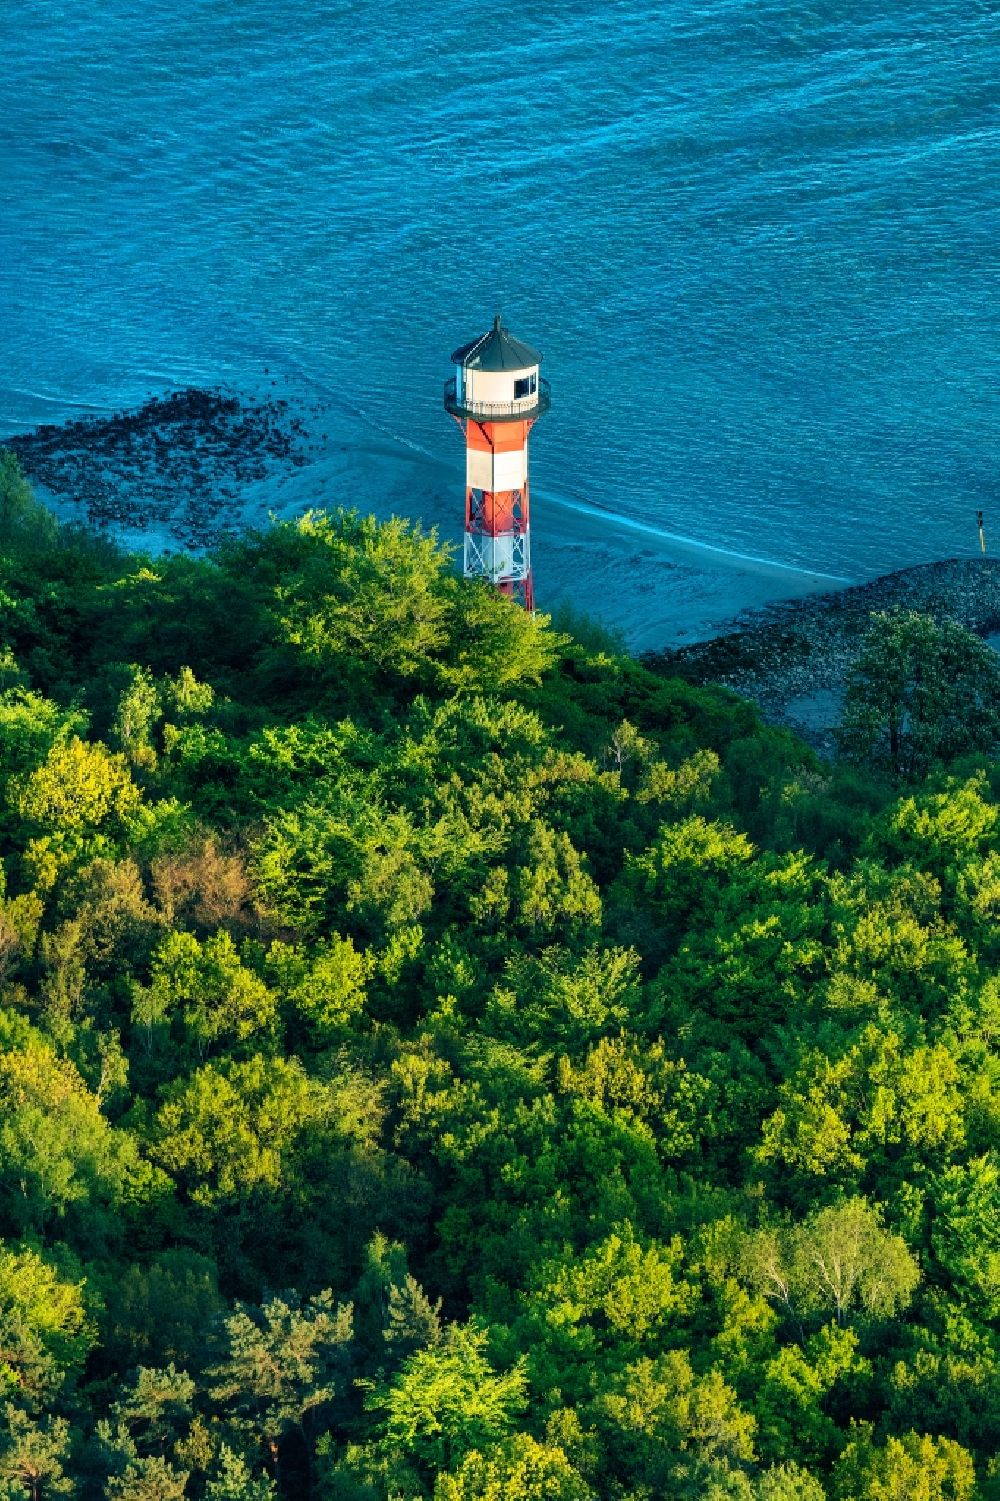 Aerial photograph Hamburg - Lighthouse Leuchtturm Wittenbergen as a historic seafaring character in the coastal area of the Elbe on Rissener Ufer in the district Rissen in Hamburg, Germany